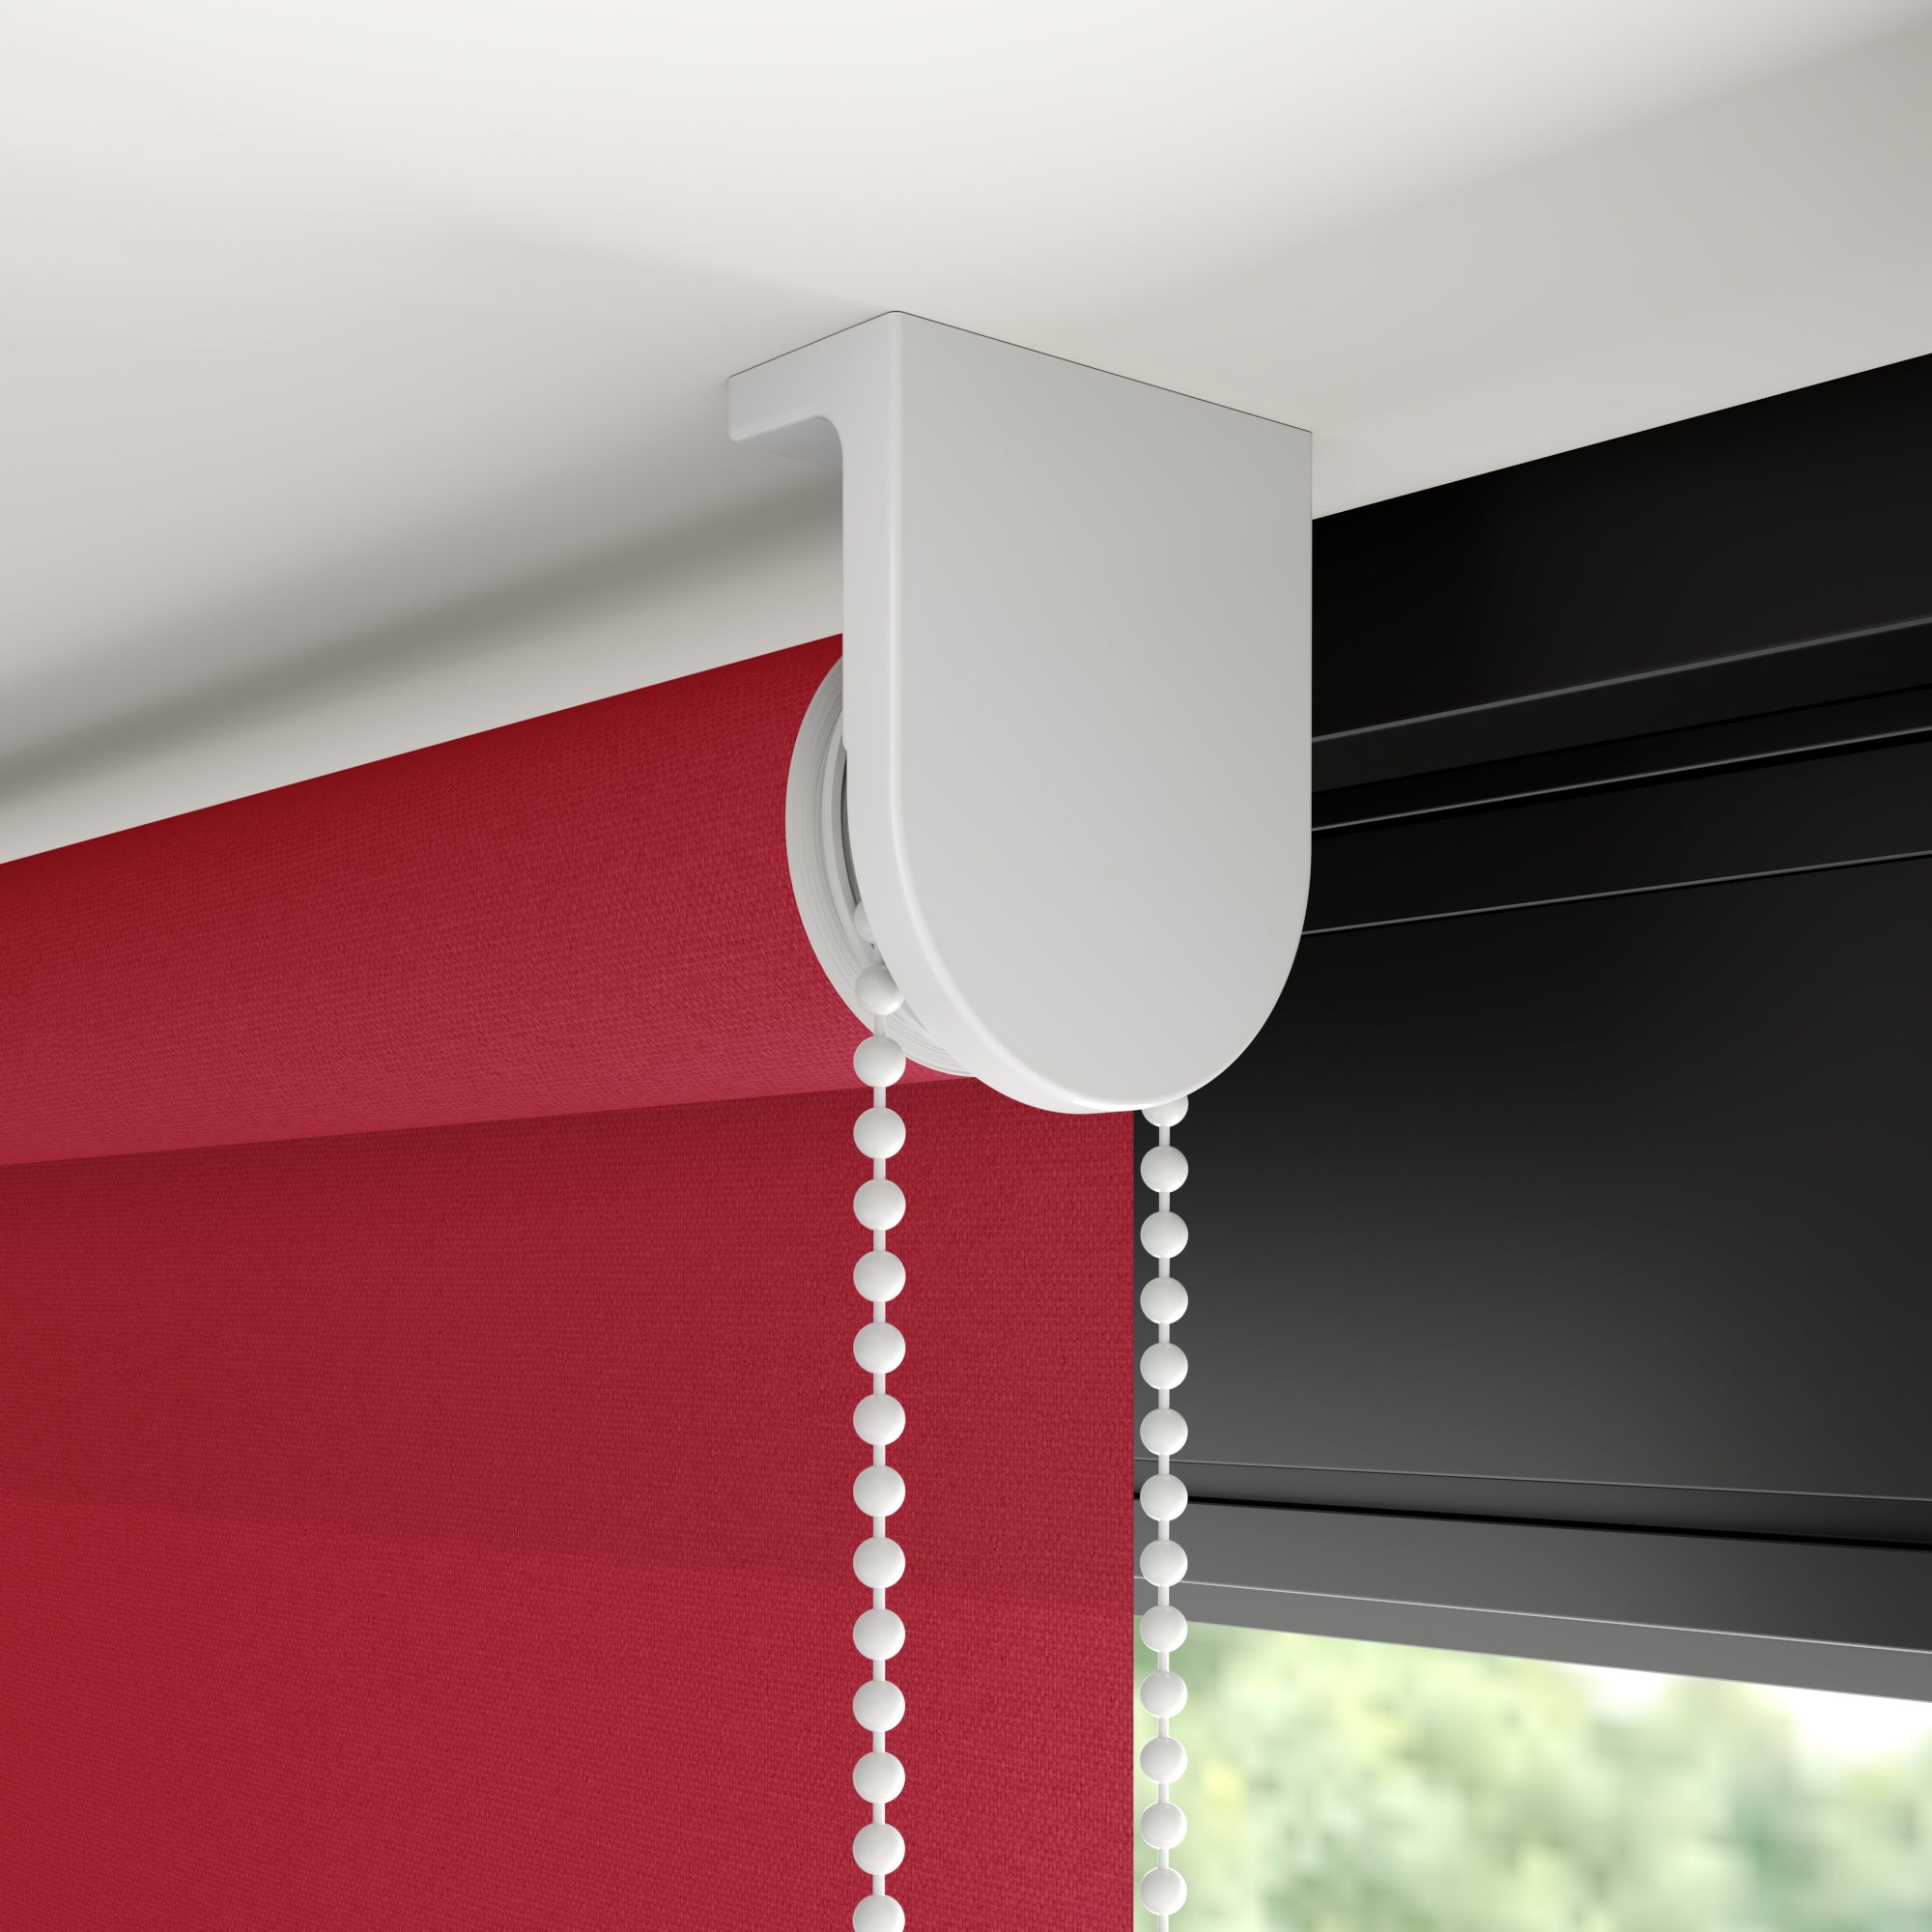 Iona Daylight Made to Measure Flame Retardant Roller Blind Iona Scarlet